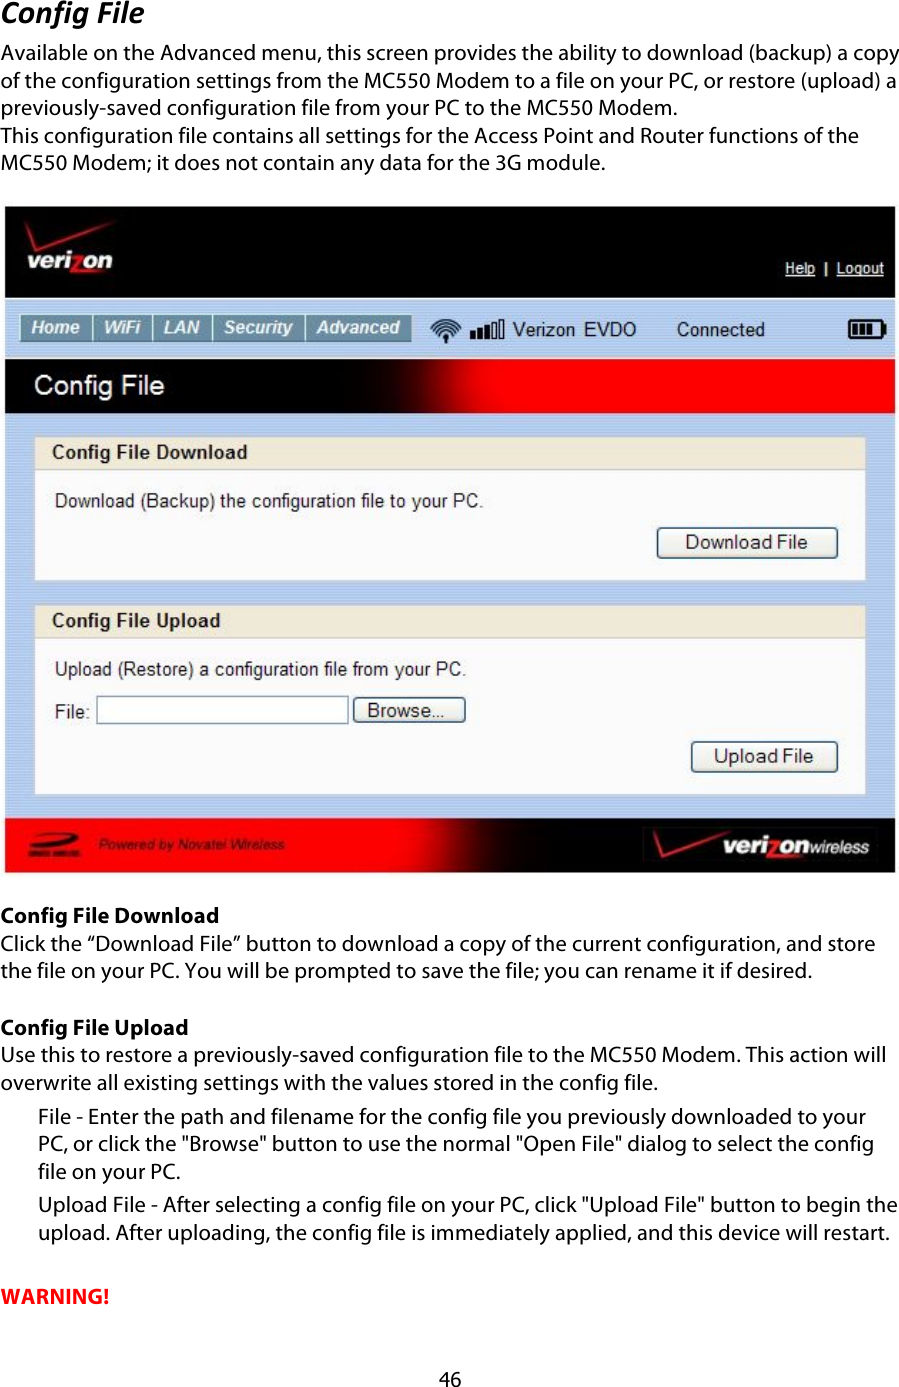  46 &amp;):290$I9;#$Available on the Advanced menu, this screen provides the ability to download (backup) a copy of the configuration settings from the MC550 Modem to a file on your PC, or restore (upload) a previously-saved configuration file from your PC to the MC550 Modem. This configuration file contains all settings for the Access Point and Router functions of the MC550 Modem; it does not contain any data for the 3G module. !Config File Download Click the “Download File” button to download a copy of the current configuration, and store the file on your PC. You will be prompted to save the file; you can rename it if desired.  Config File Upload Use this to restore a previously-saved configuration file to the MC550 Modem. This action will overwrite all existing settings with the values stored in the config file. File - Enter the path and filename for the config file you previously downloaded to your PC, or click the &quot;Browse&quot; button to use the normal &quot;Open File&quot; dialog to select the config file on your PC. Upload File - After selecting a config file on your PC, click &quot;Upload File&quot; button to begin the upload. After uploading, the config file is immediately applied, and this device will restart.  WARNING! 